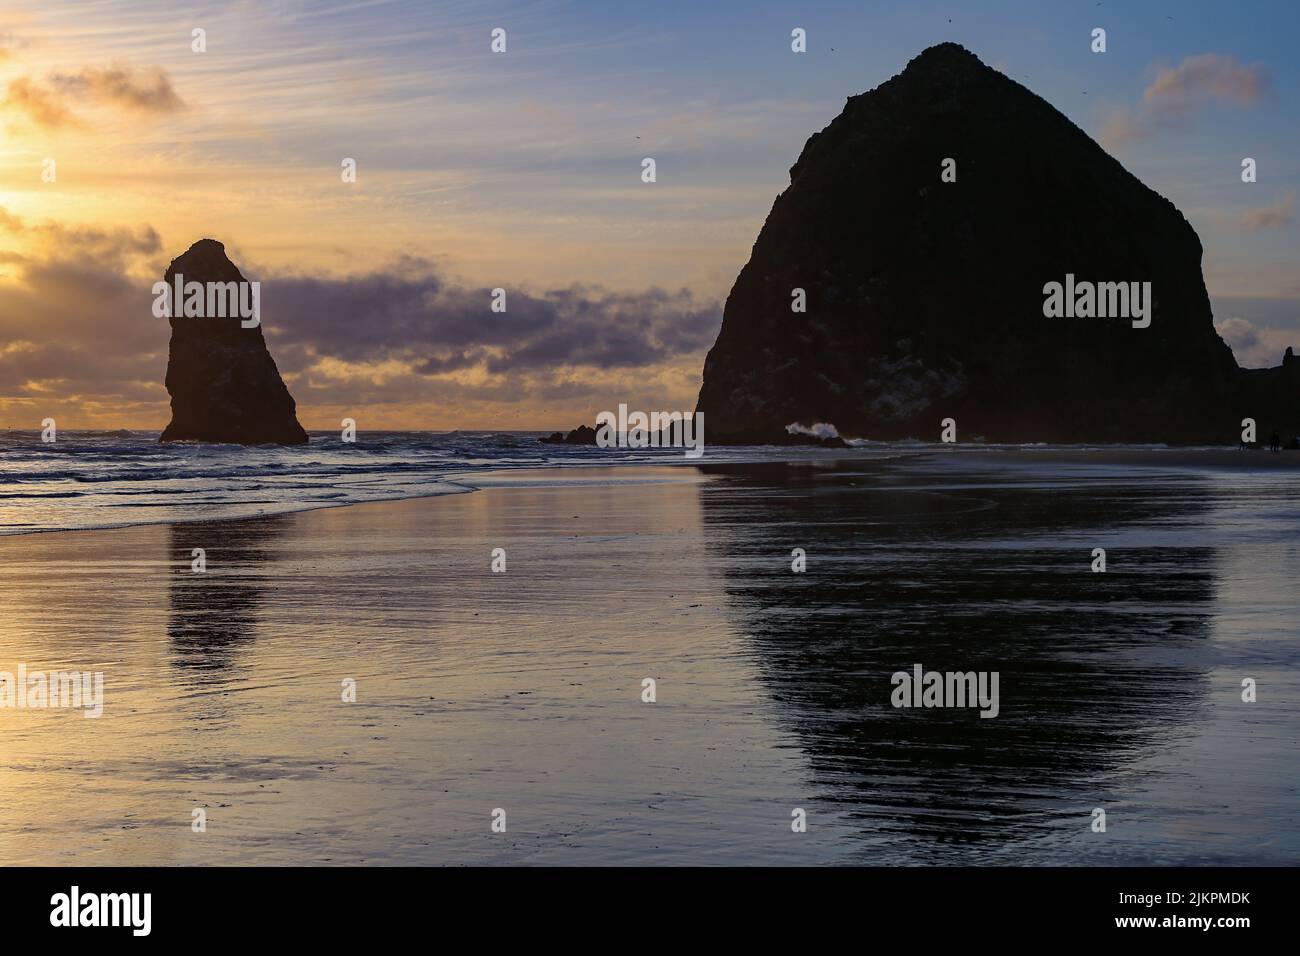 A silhouette of the Haystack Rock in Cannon Beach reflecting on the water surface at sunrise, Oregon, United States Stock Photo